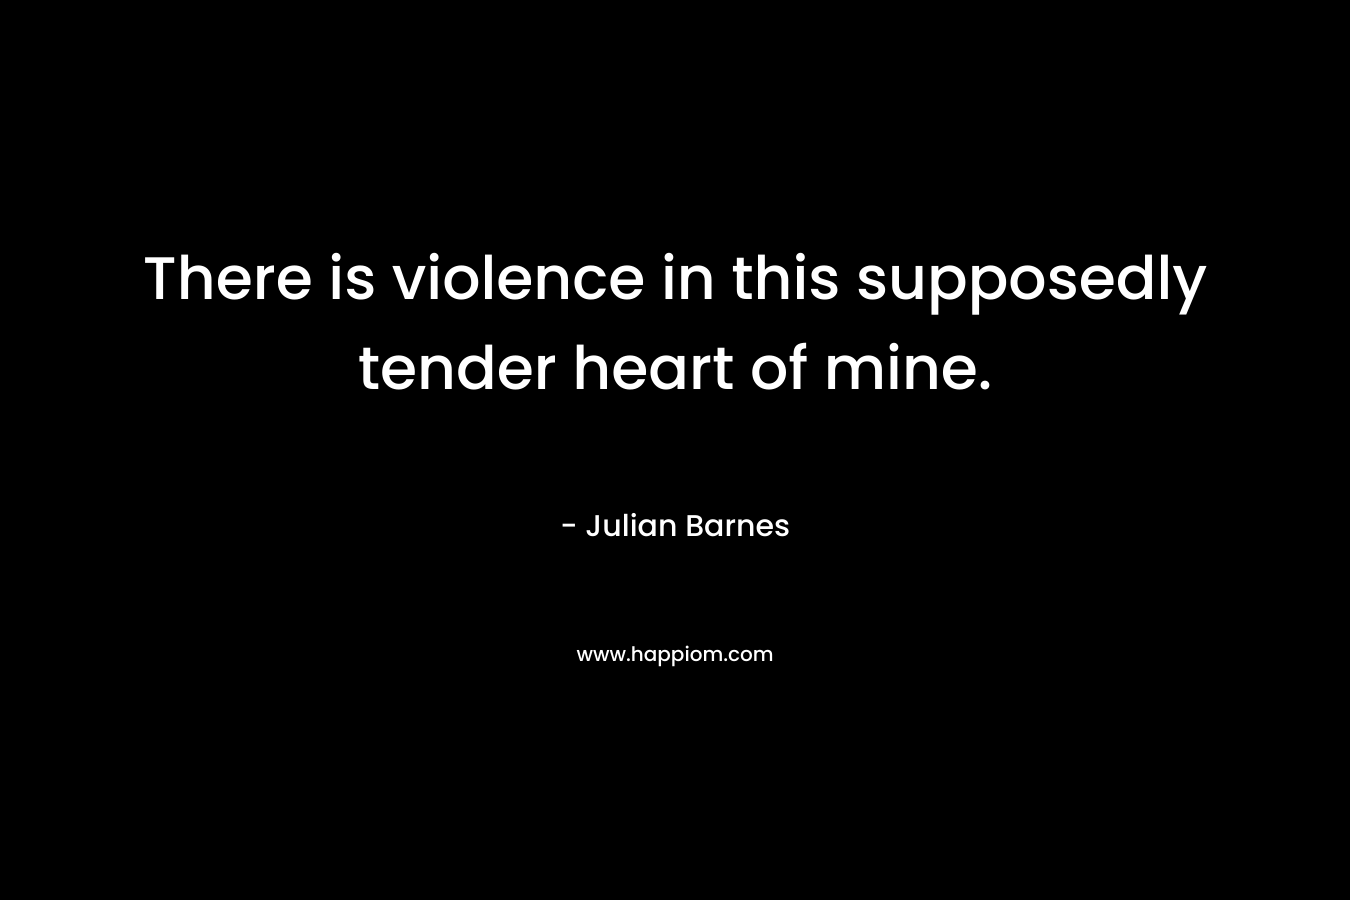 There is violence in this supposedly tender heart of mine.